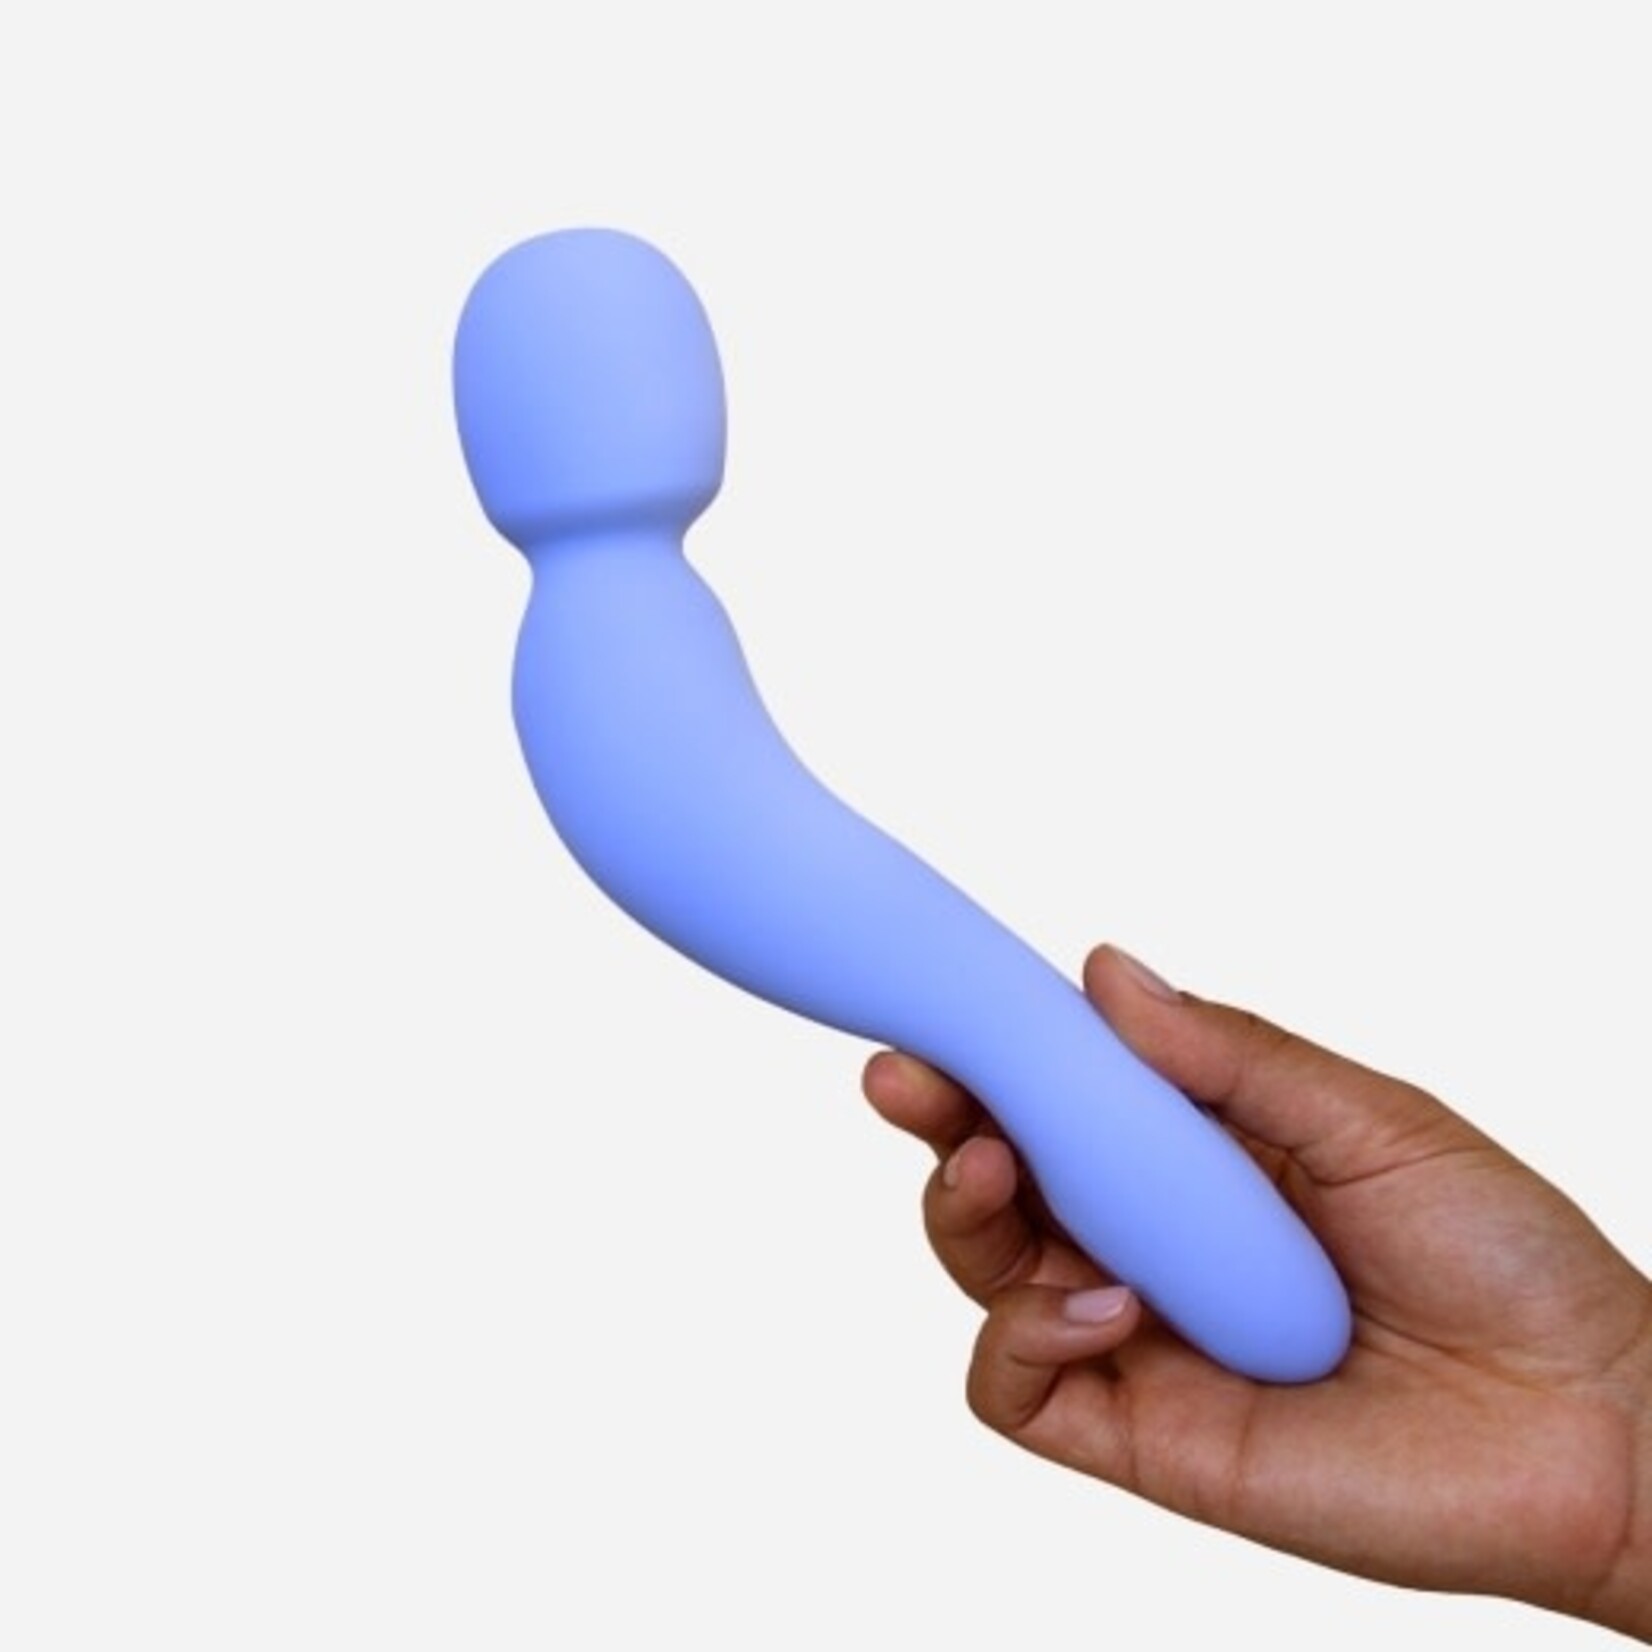 DAME COM WAND MASSAGER IN PERIWINKLE